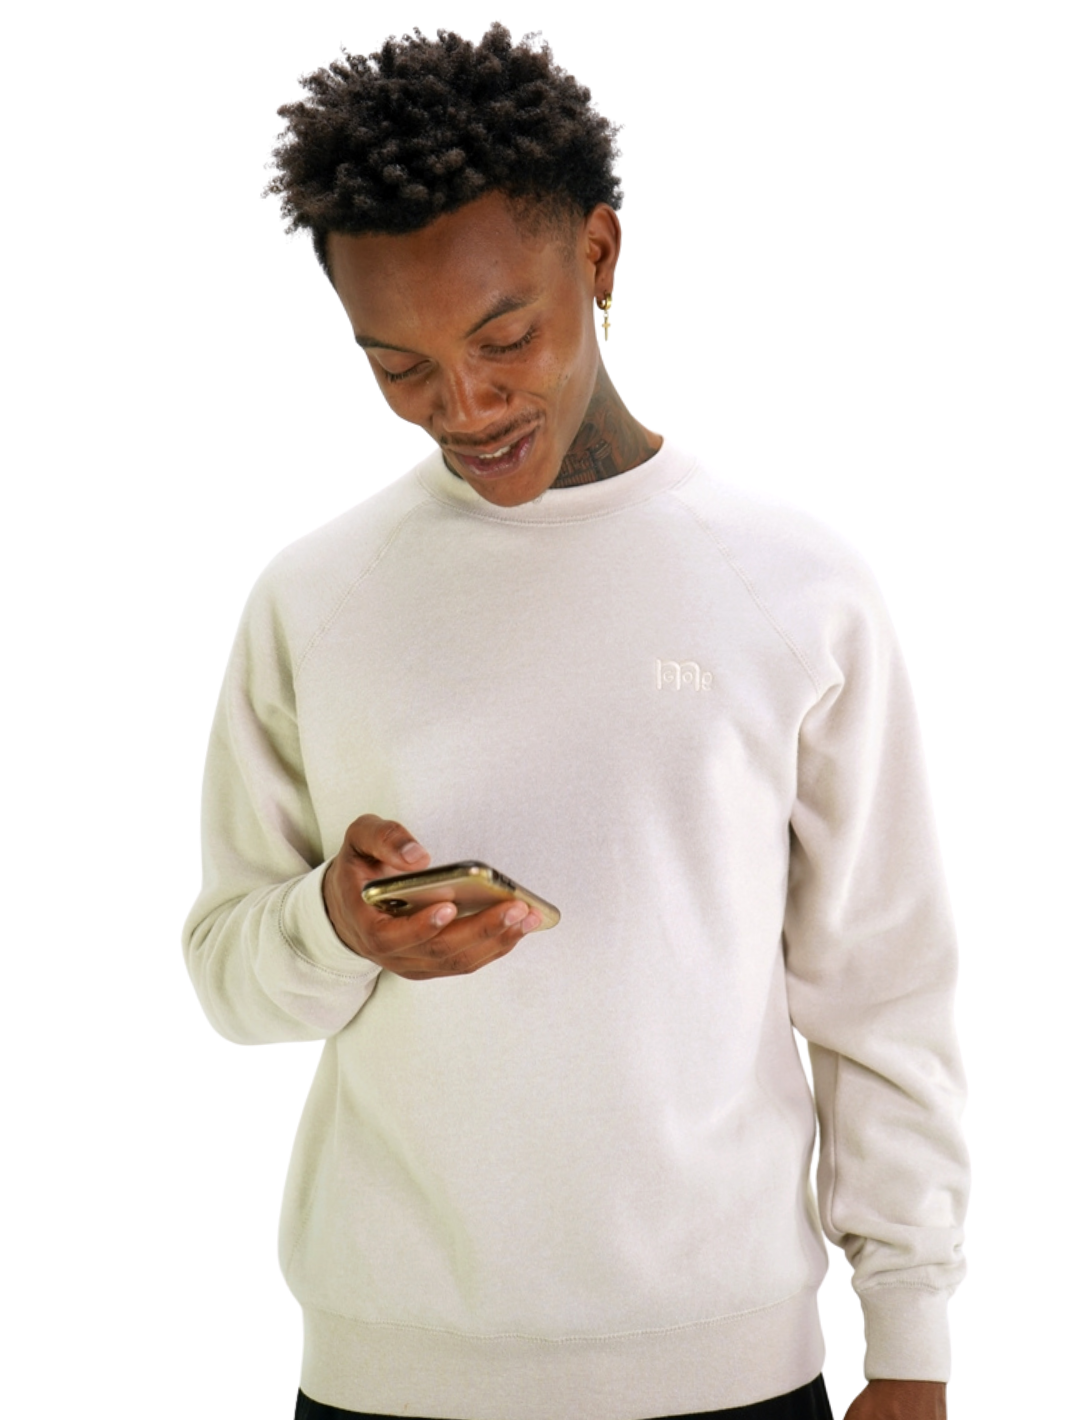 GODinme Crewneck Sweater; luxurious comfort, Beige with raglan sleeves and GODinme logo at left chest.